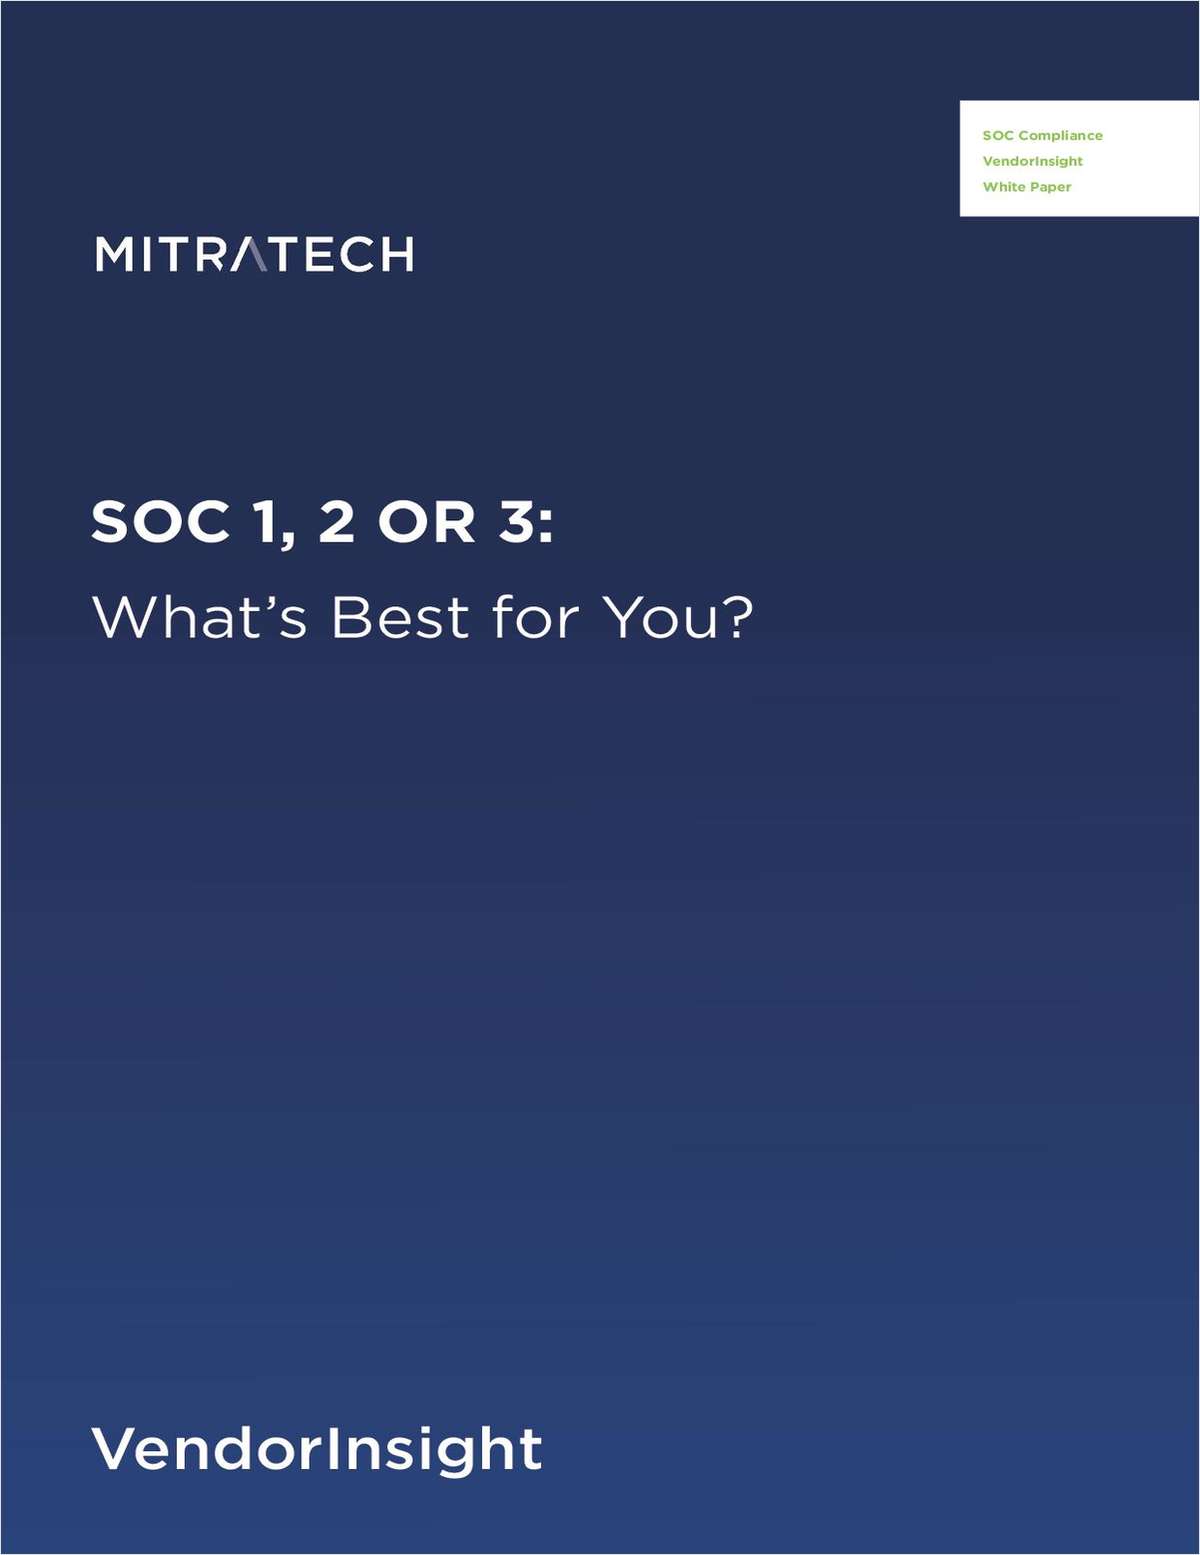 SOC 1, 2 or 3 - What is Best for You - Mitratech White Paper